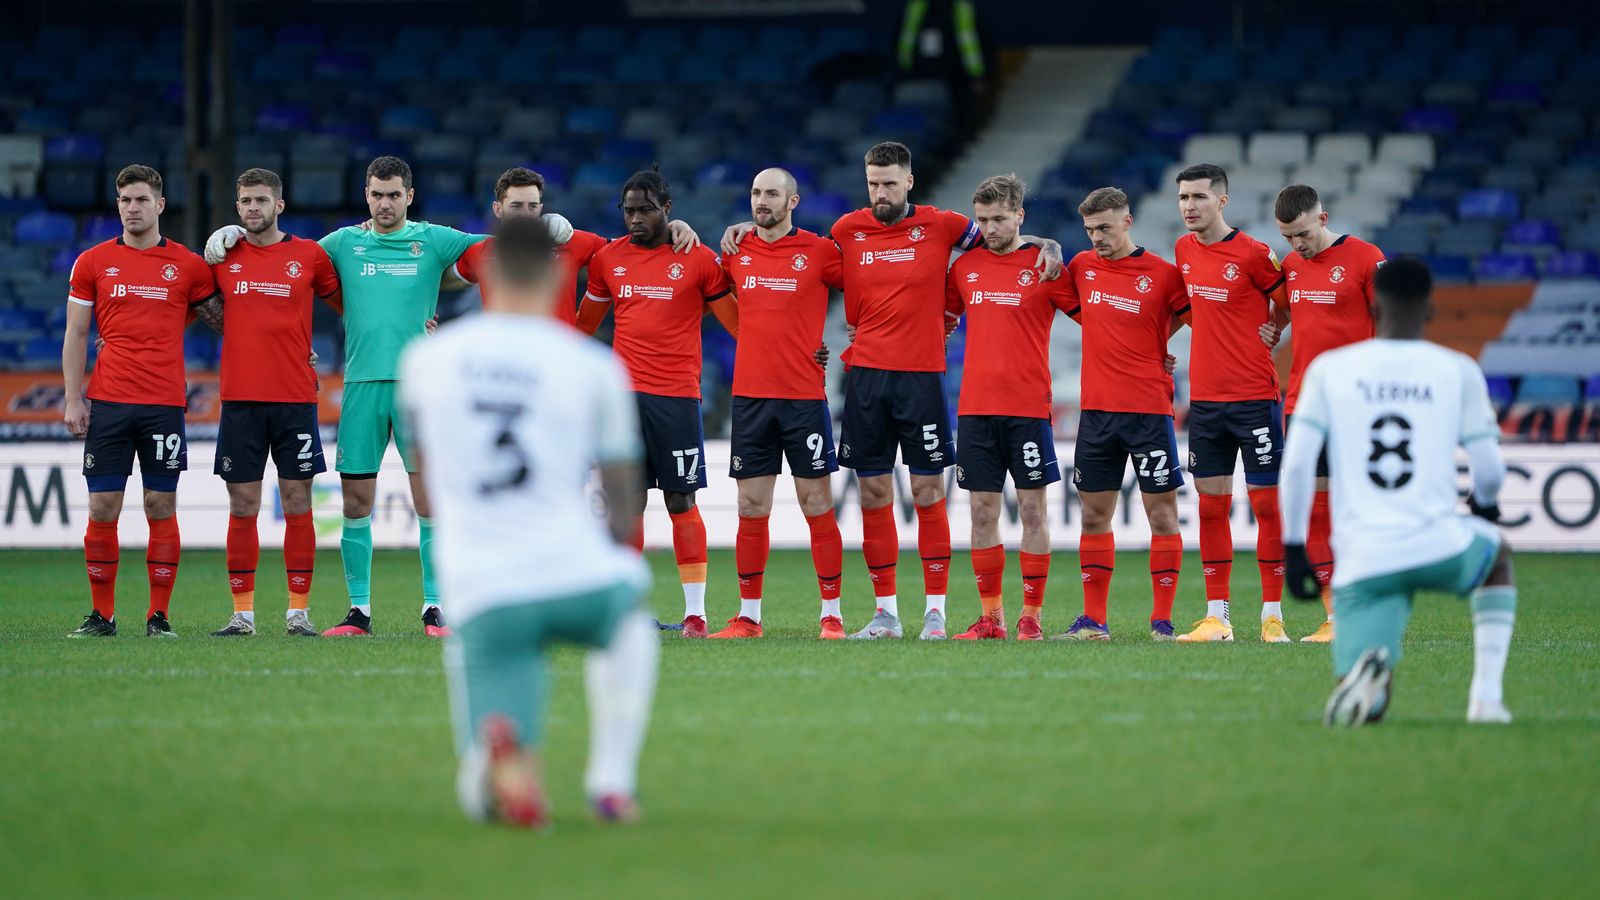 Luton confirm players will not take a knee before games over fears gesture 'misrepresented as a political statement'